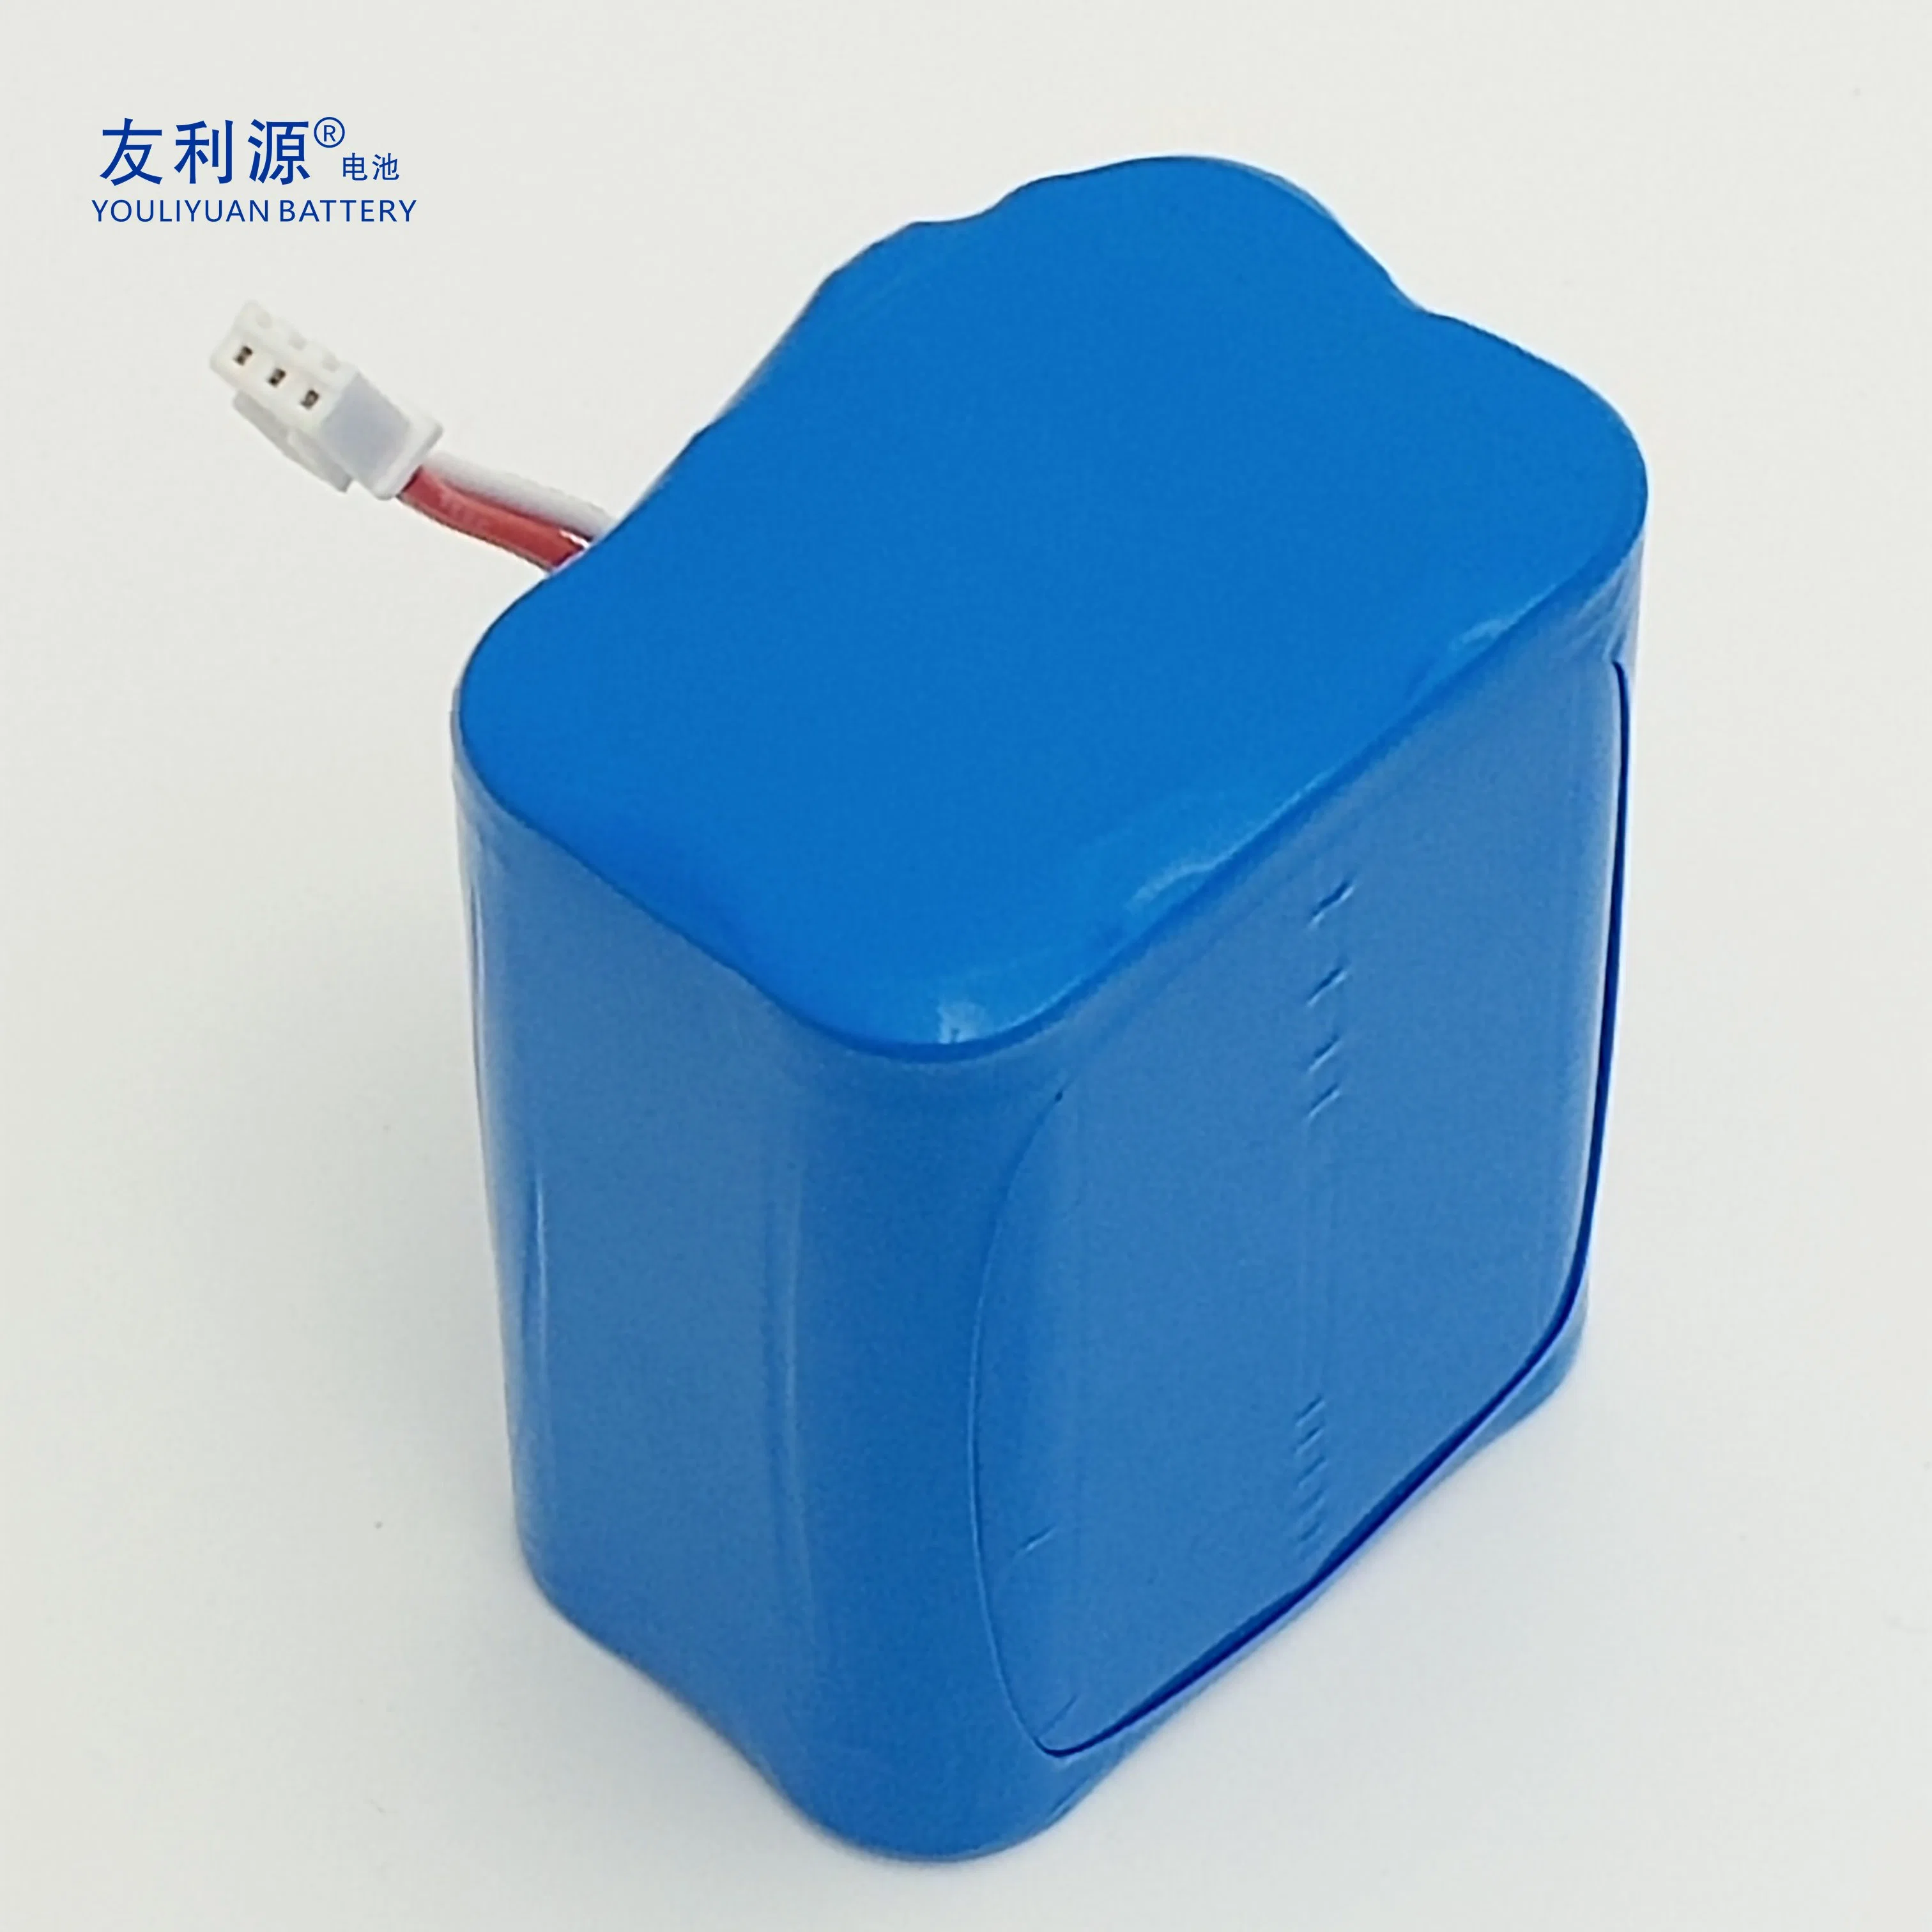 Factory Price 7.4V 7.2ah 2s3p 18650 Rechargeable Lithium Battery Pack for Consumer Electronics LED Lights